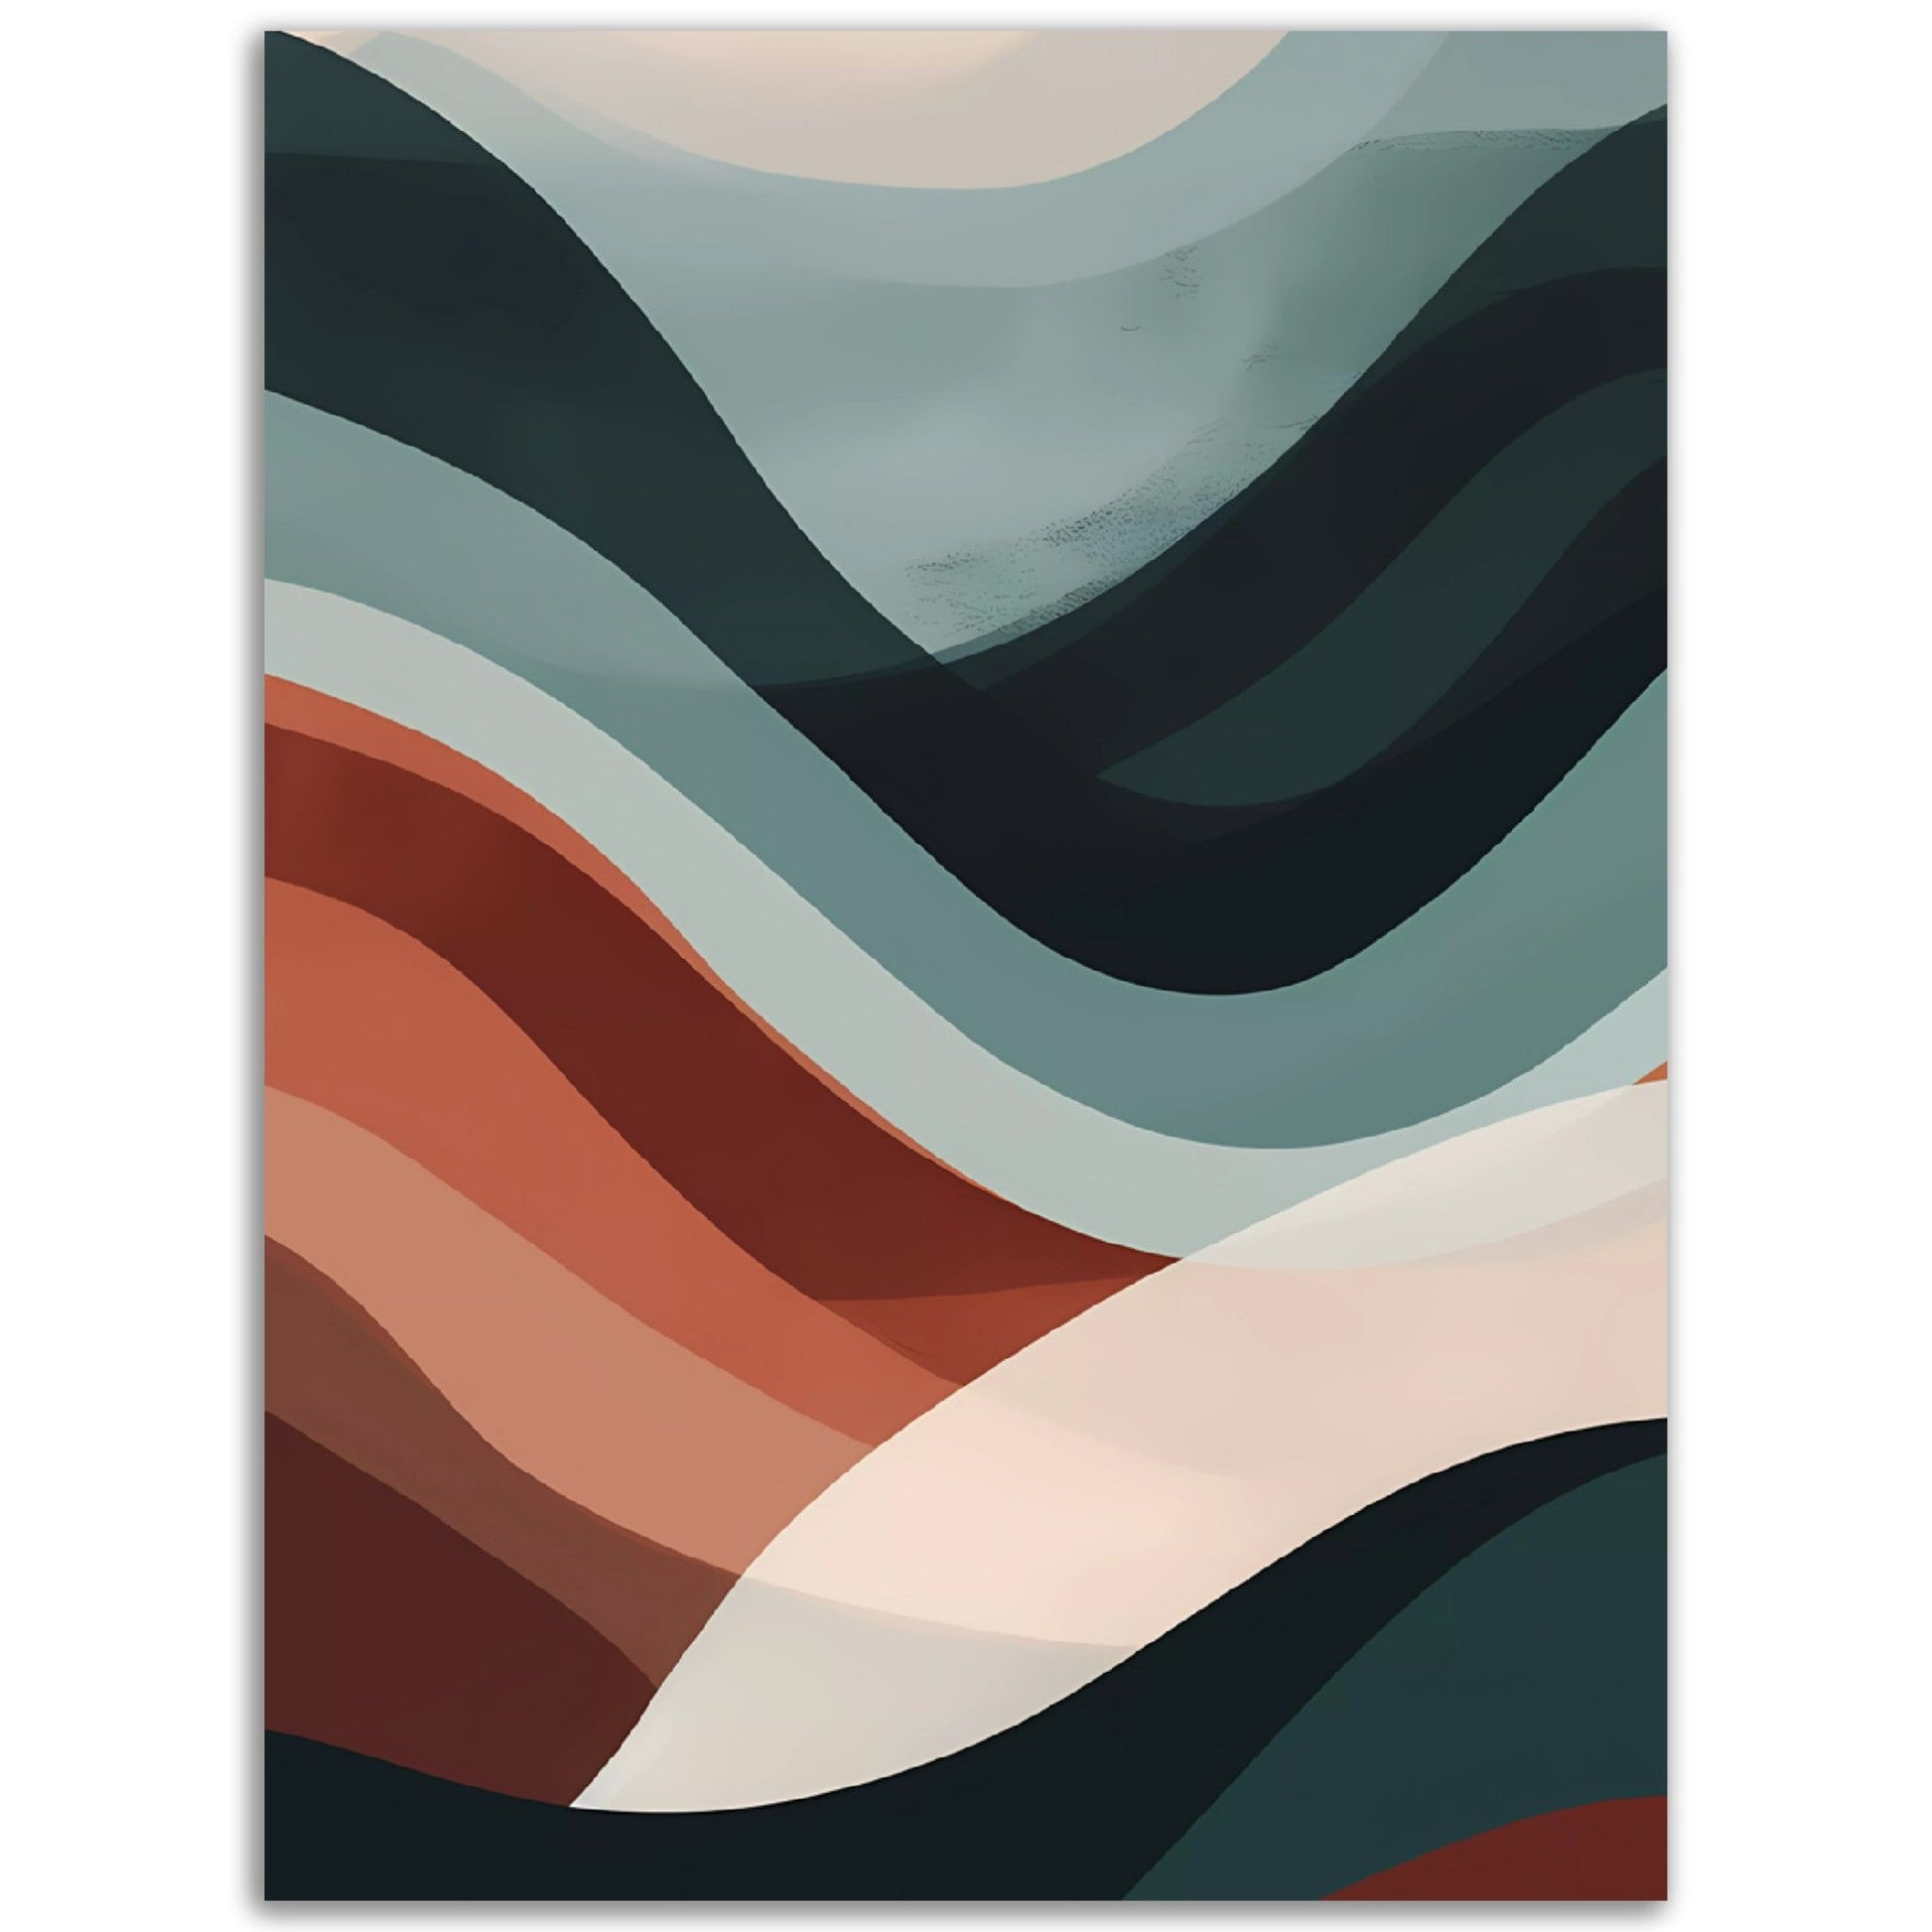 An Rolling Hills painting of waves on a black background, perfect for poster wall art in any room.